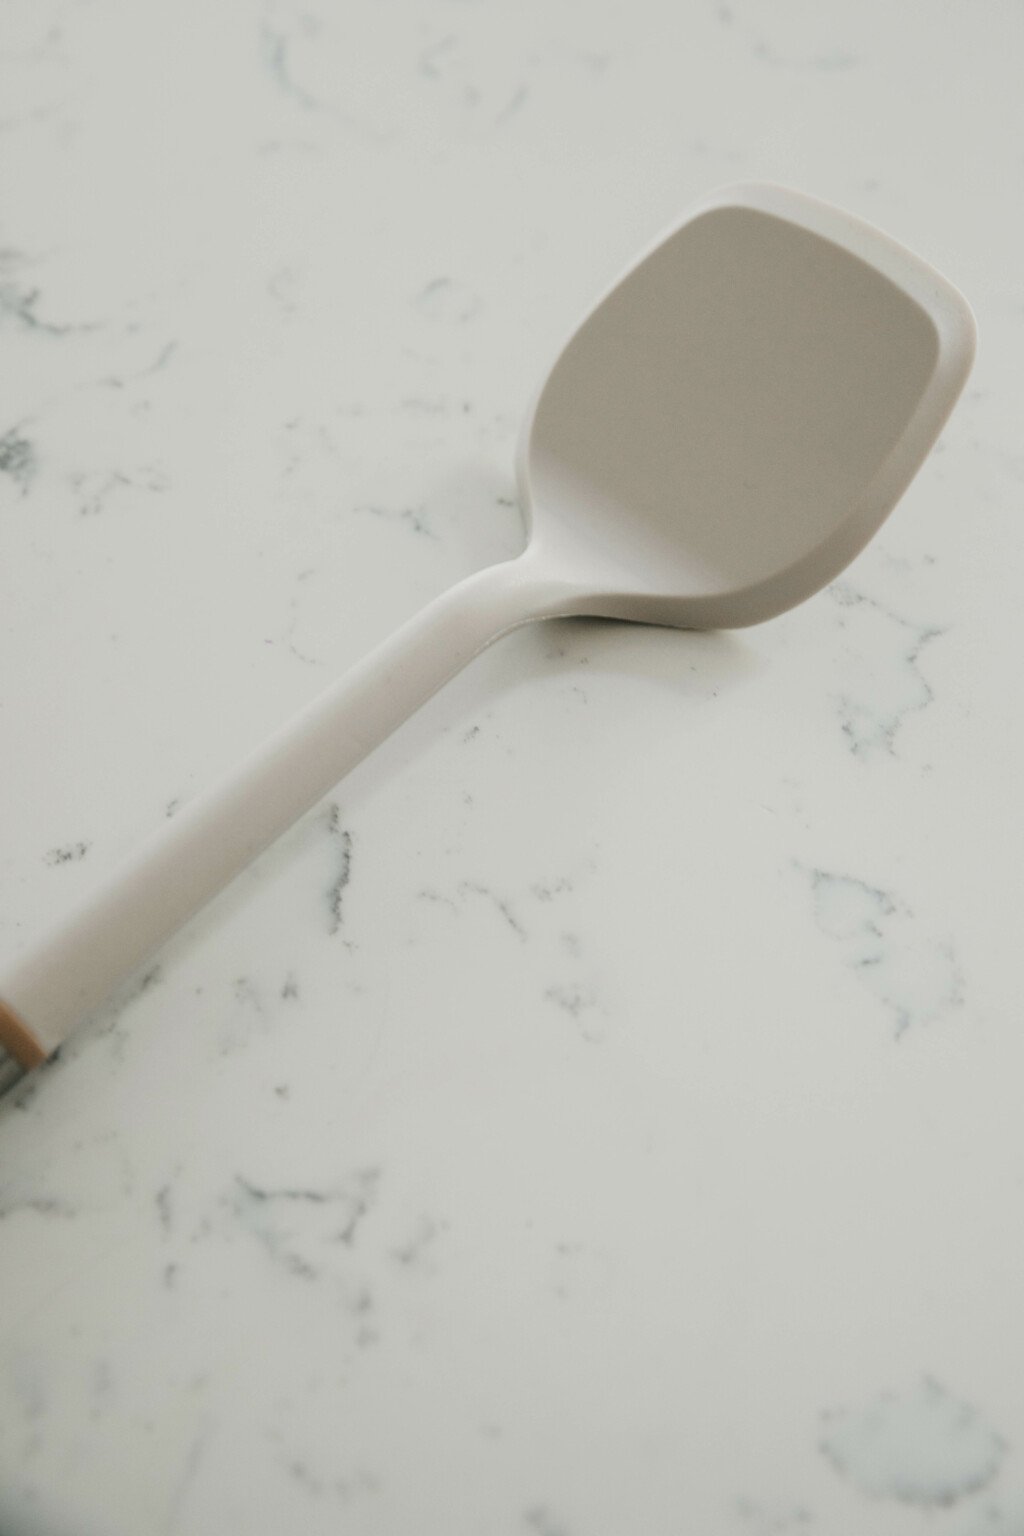 A silicone spatula rests on a white marble surface.